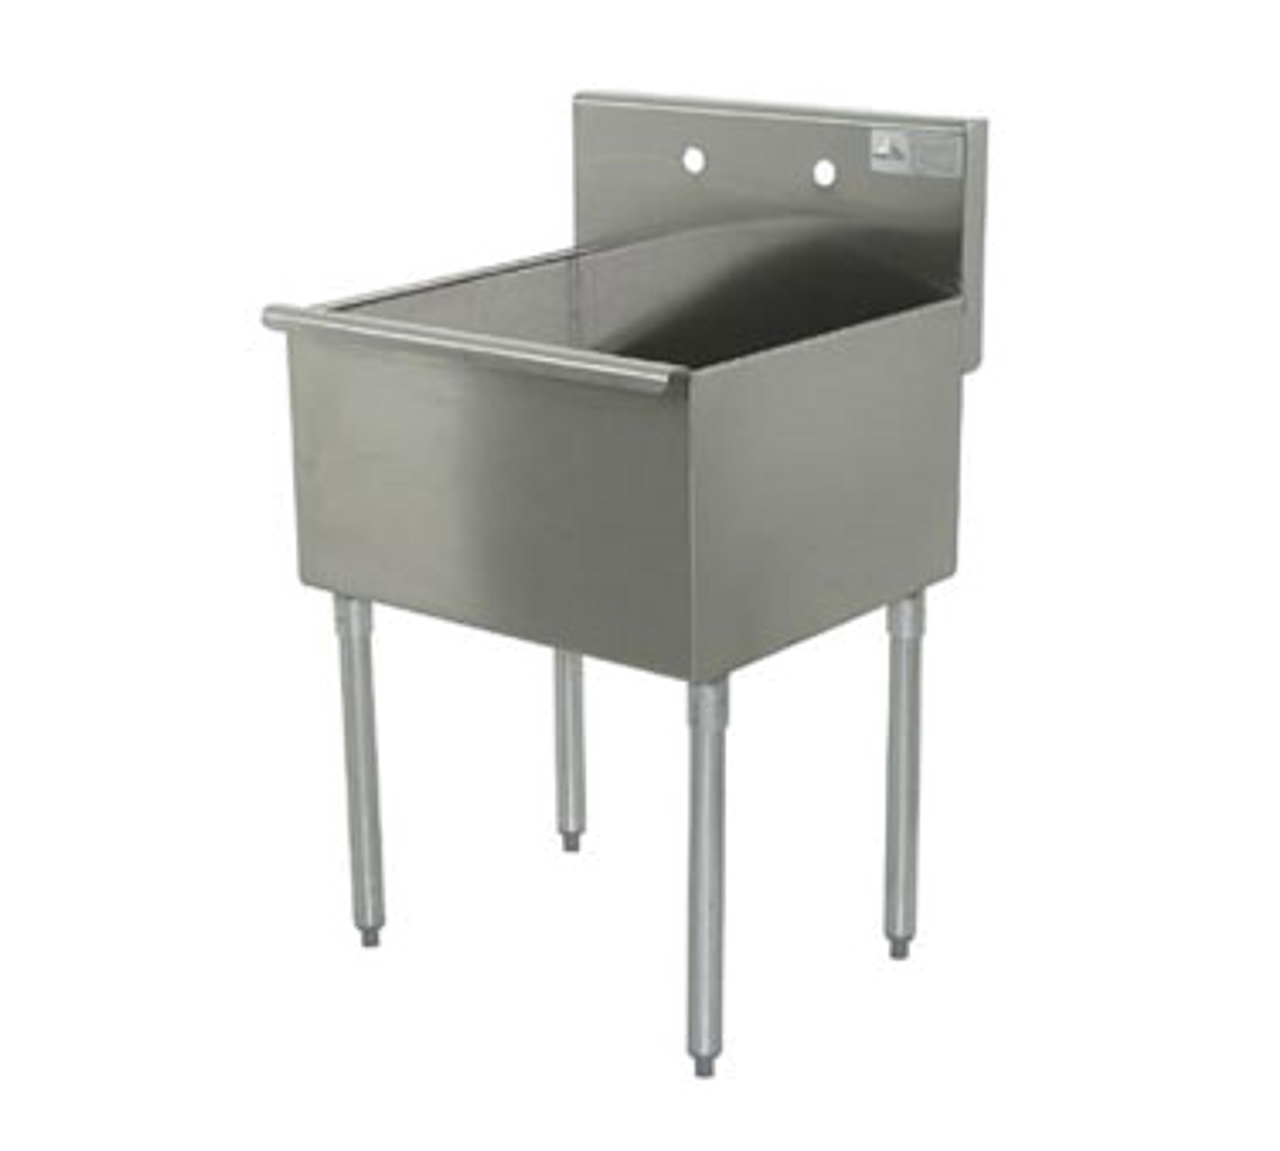 Square Corner Scullery Sink, 1-compartment, 18"W x 18"D front-to-back x 14" deep sink compartment, 8"H backsplash, 1-1/2 IPS waste drain basket included, 16 gauge 430 stainless steel, galvanized legs with plastic bullet feet, 21-1/2" F/B x 18" L/R (overall)